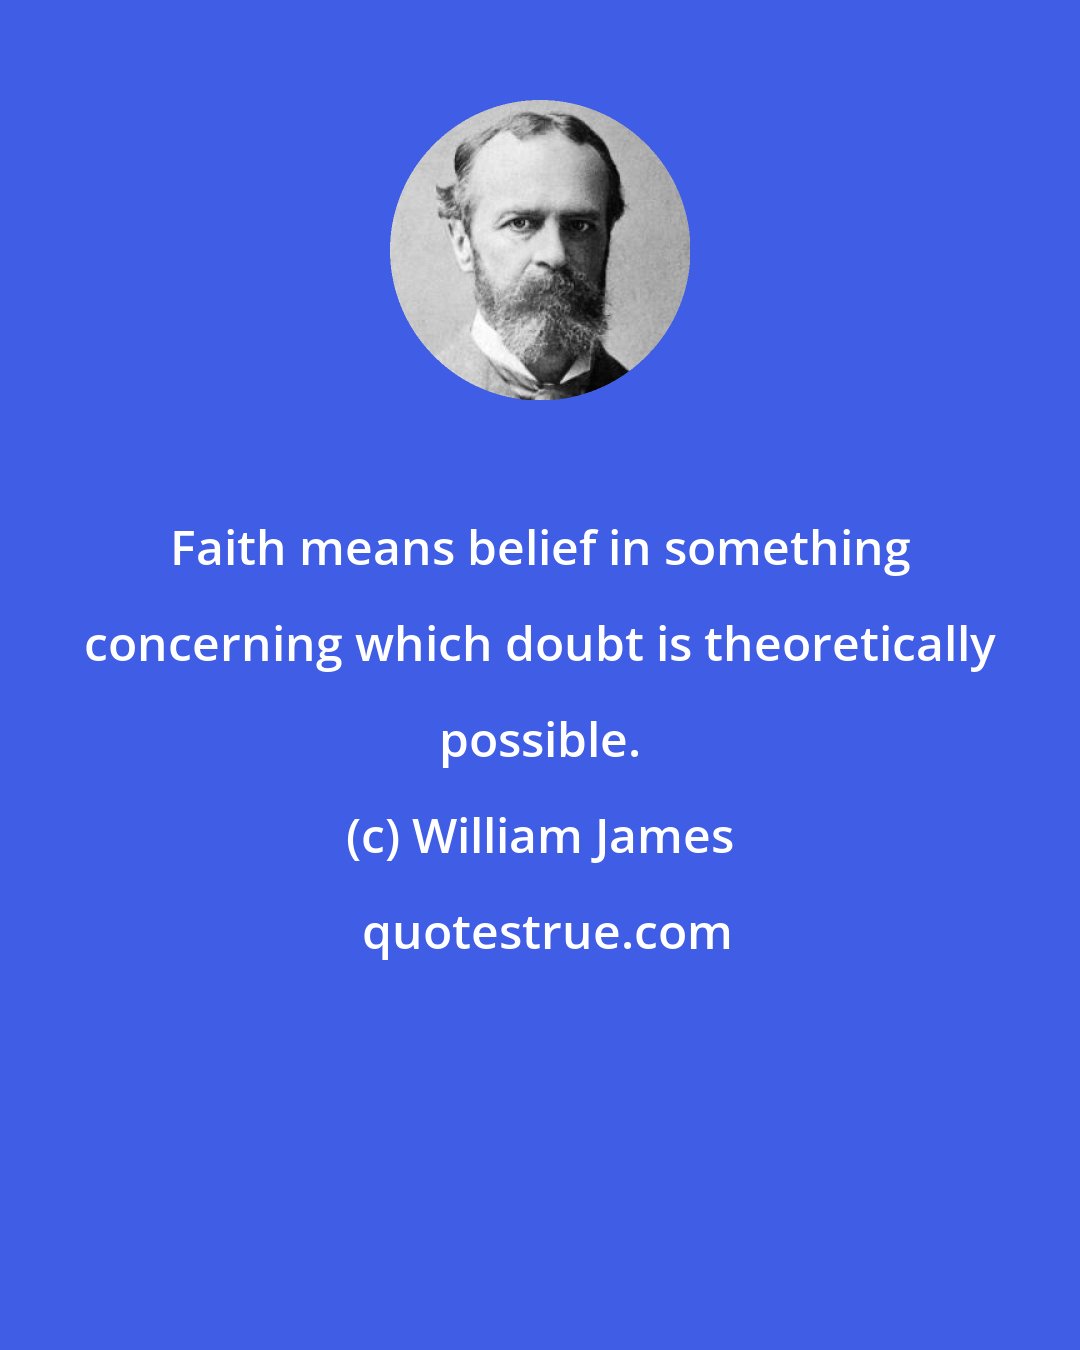 William James: Faith means belief in something concerning which doubt is theoretically possible.